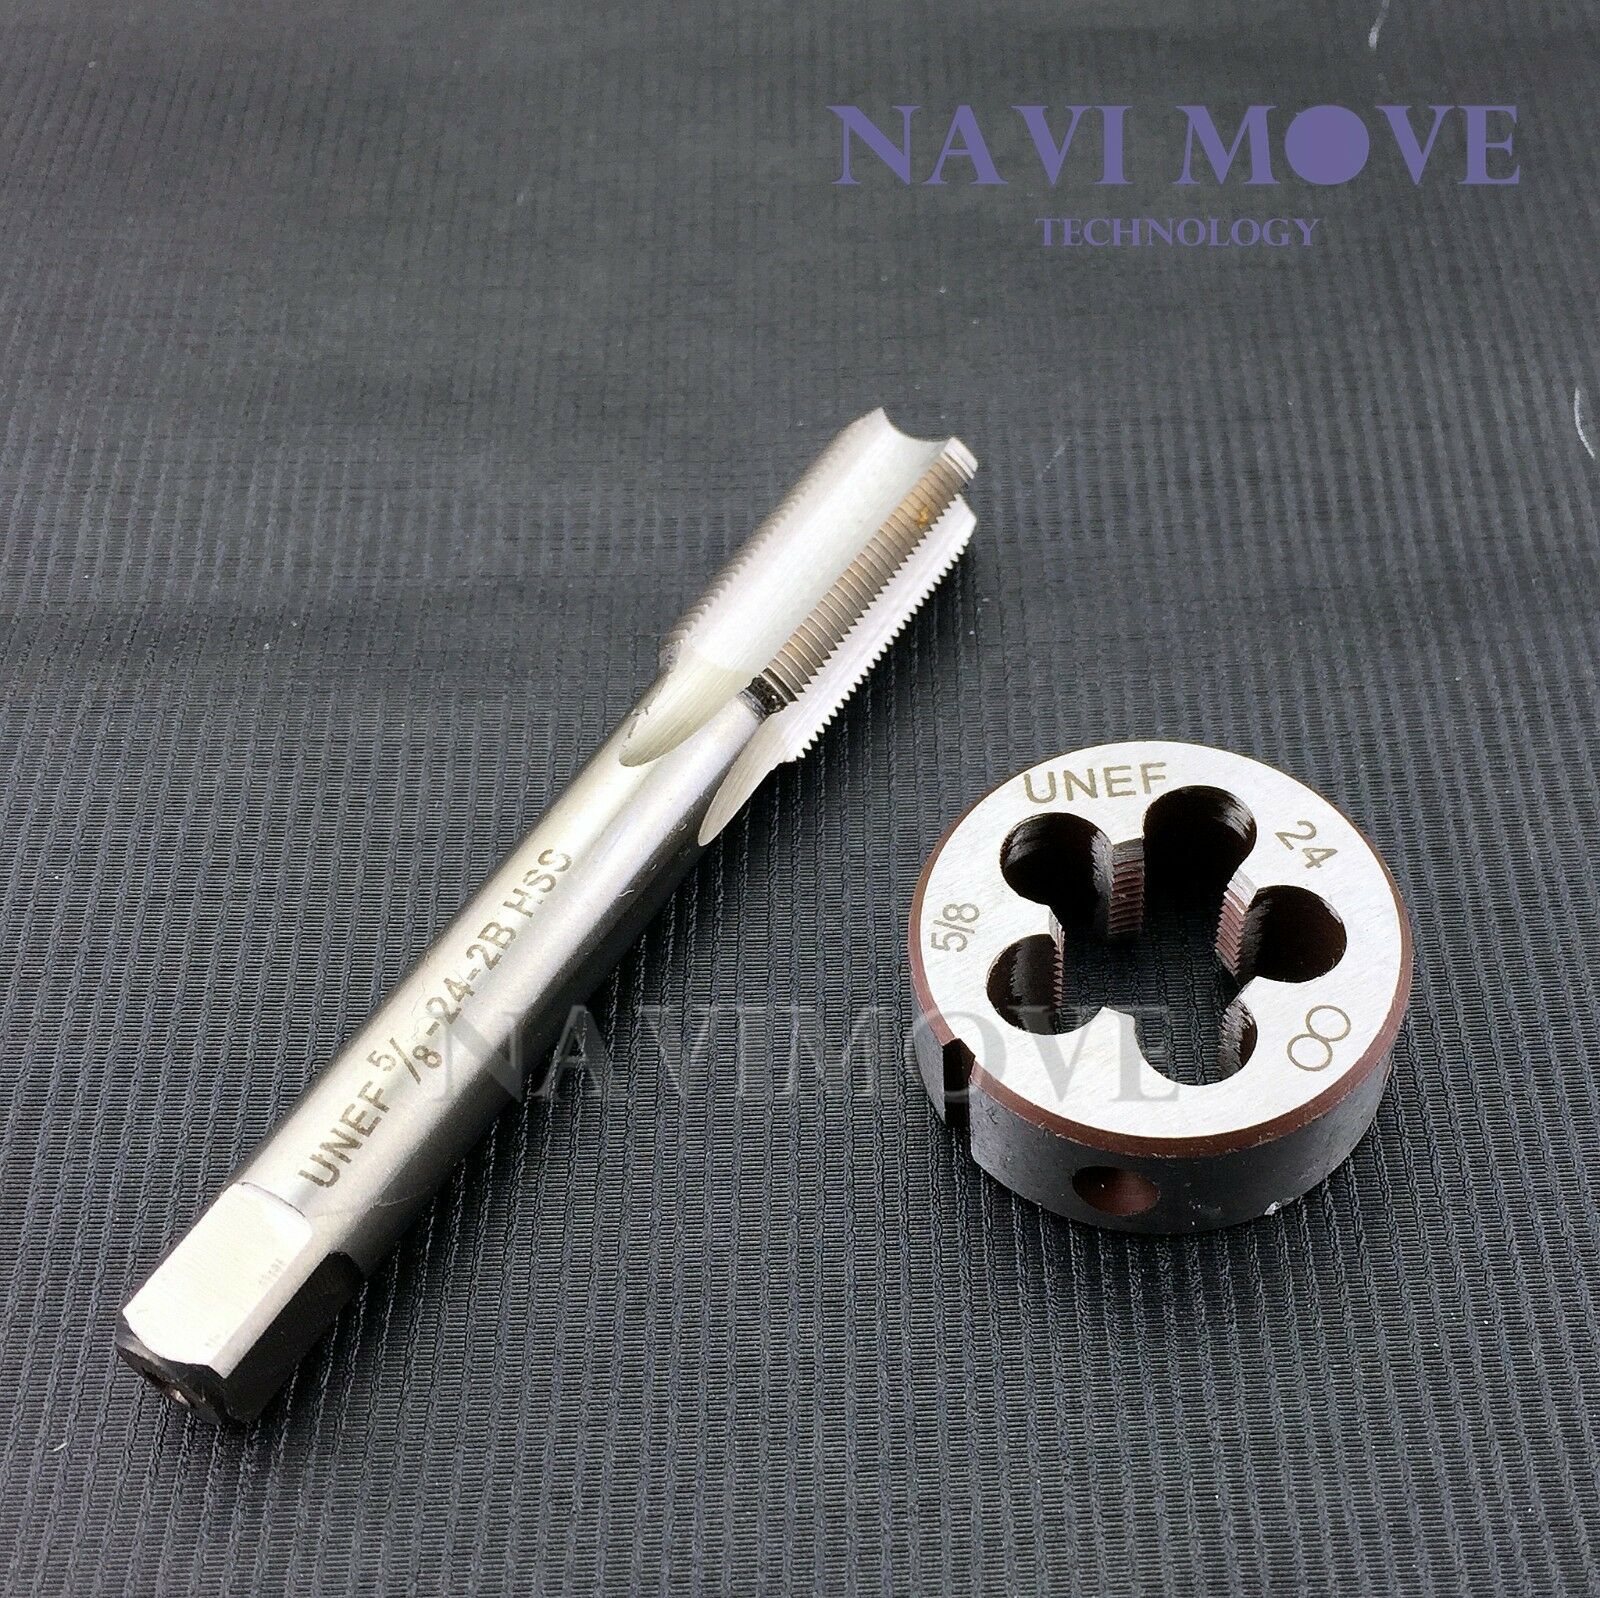 New Hss 5/8"-24 Unef Right Hand Thread Tap And Die Set Us Stock (5/8x24)